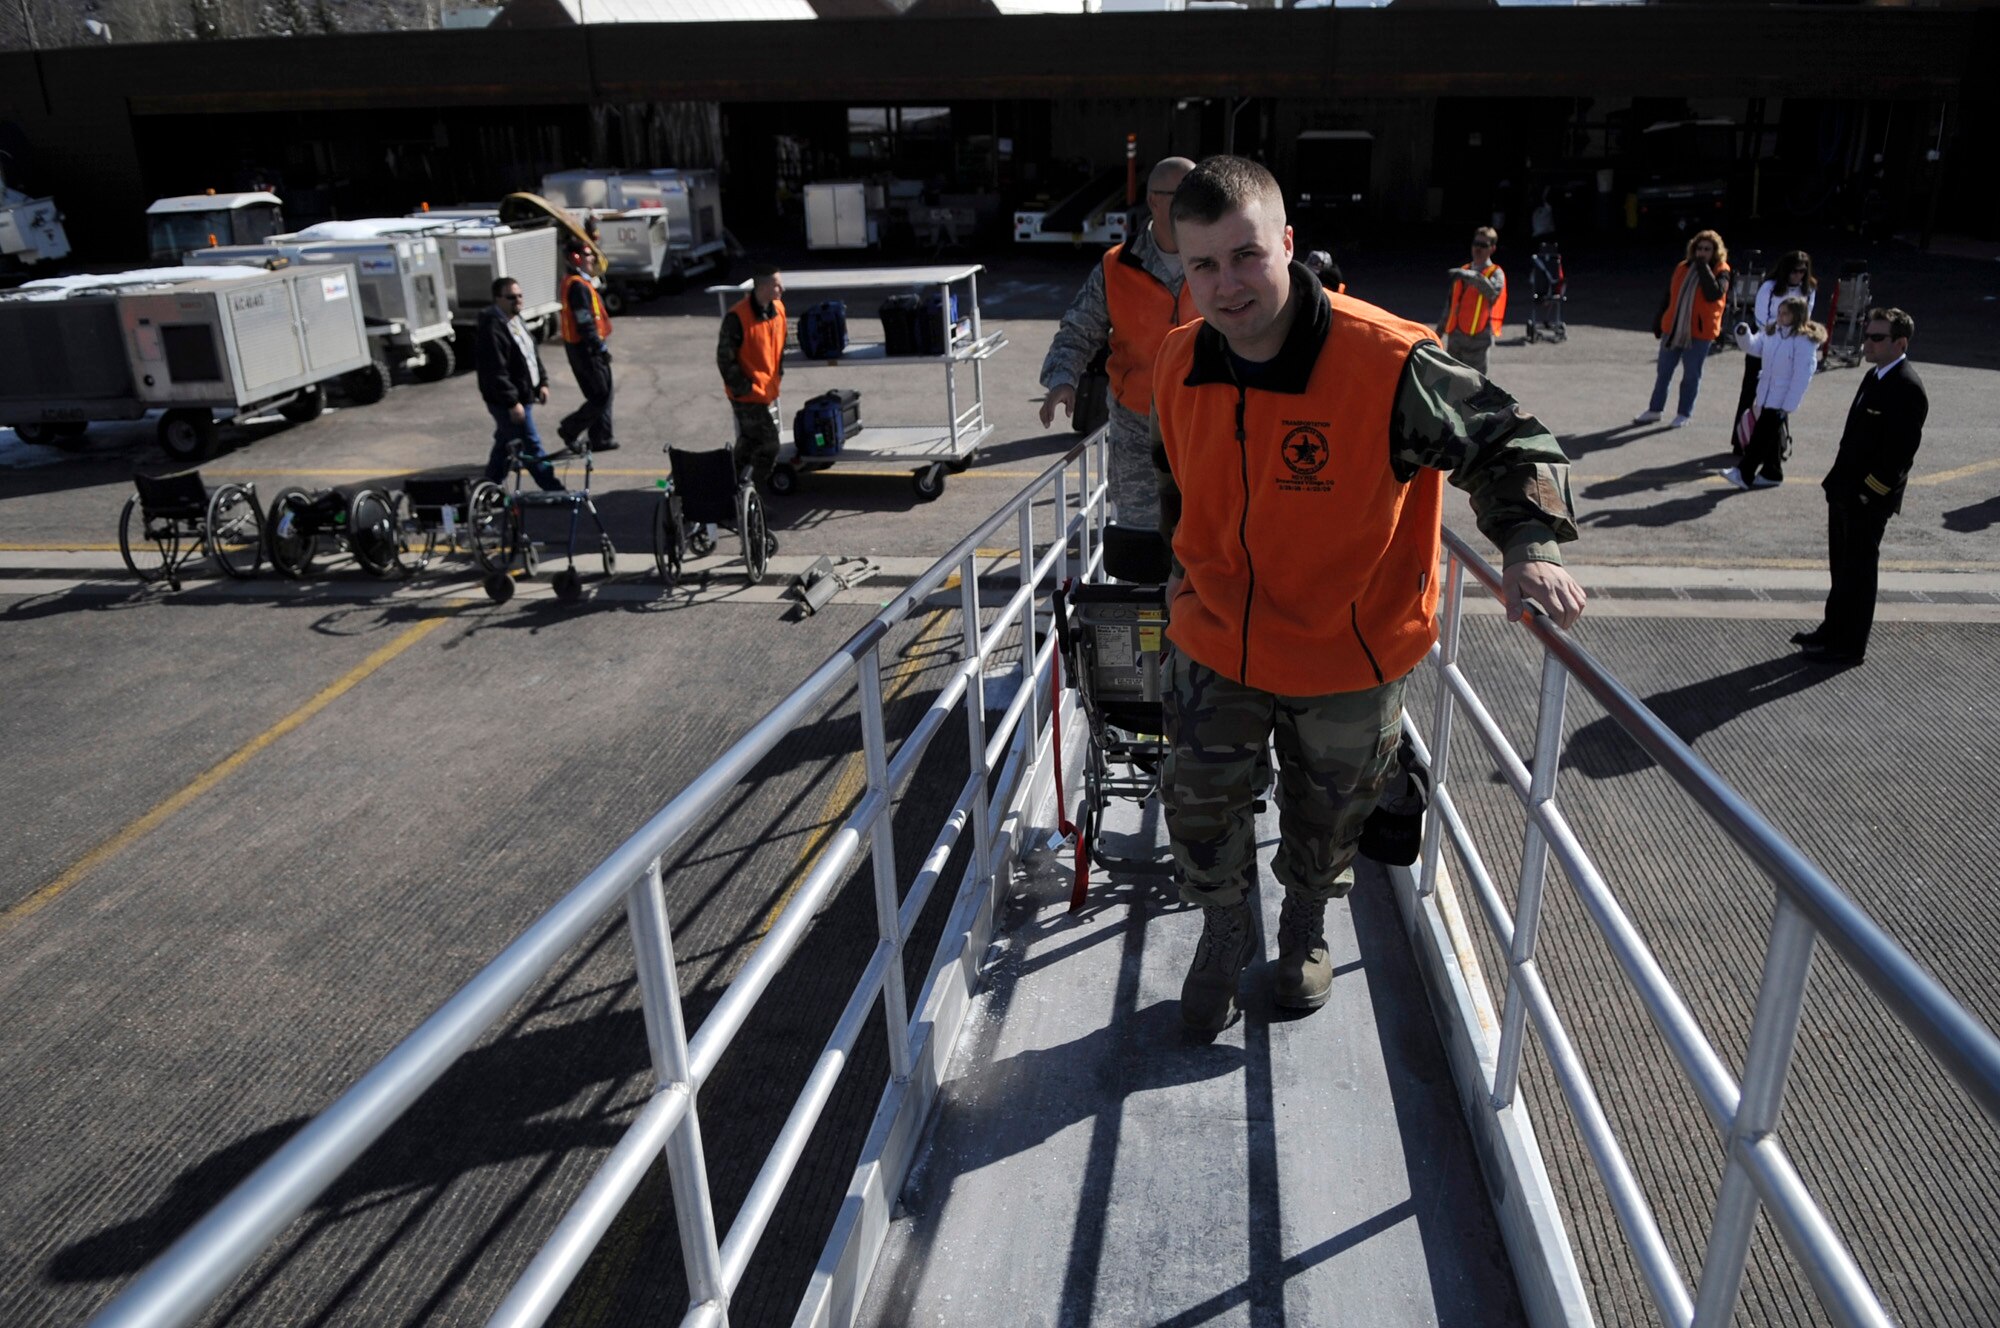 Airman 1st Class David Hague works his way up the ramp of a United aircraft to escort veterans off the aircraft March 28 at the Aspen Airport, Colo. Airman Hague is an aerospace propulsion journeyman assigned to the 56th Component Maintanance Squadron at Luke Air Force Base, Ariz. Veterans from all over the world fly into Aspen to attend the Disabled American Veterans Winter Sports Clinic. (U.S. Air Force photo/Staff Sgt. Desiree N. Palacios)

